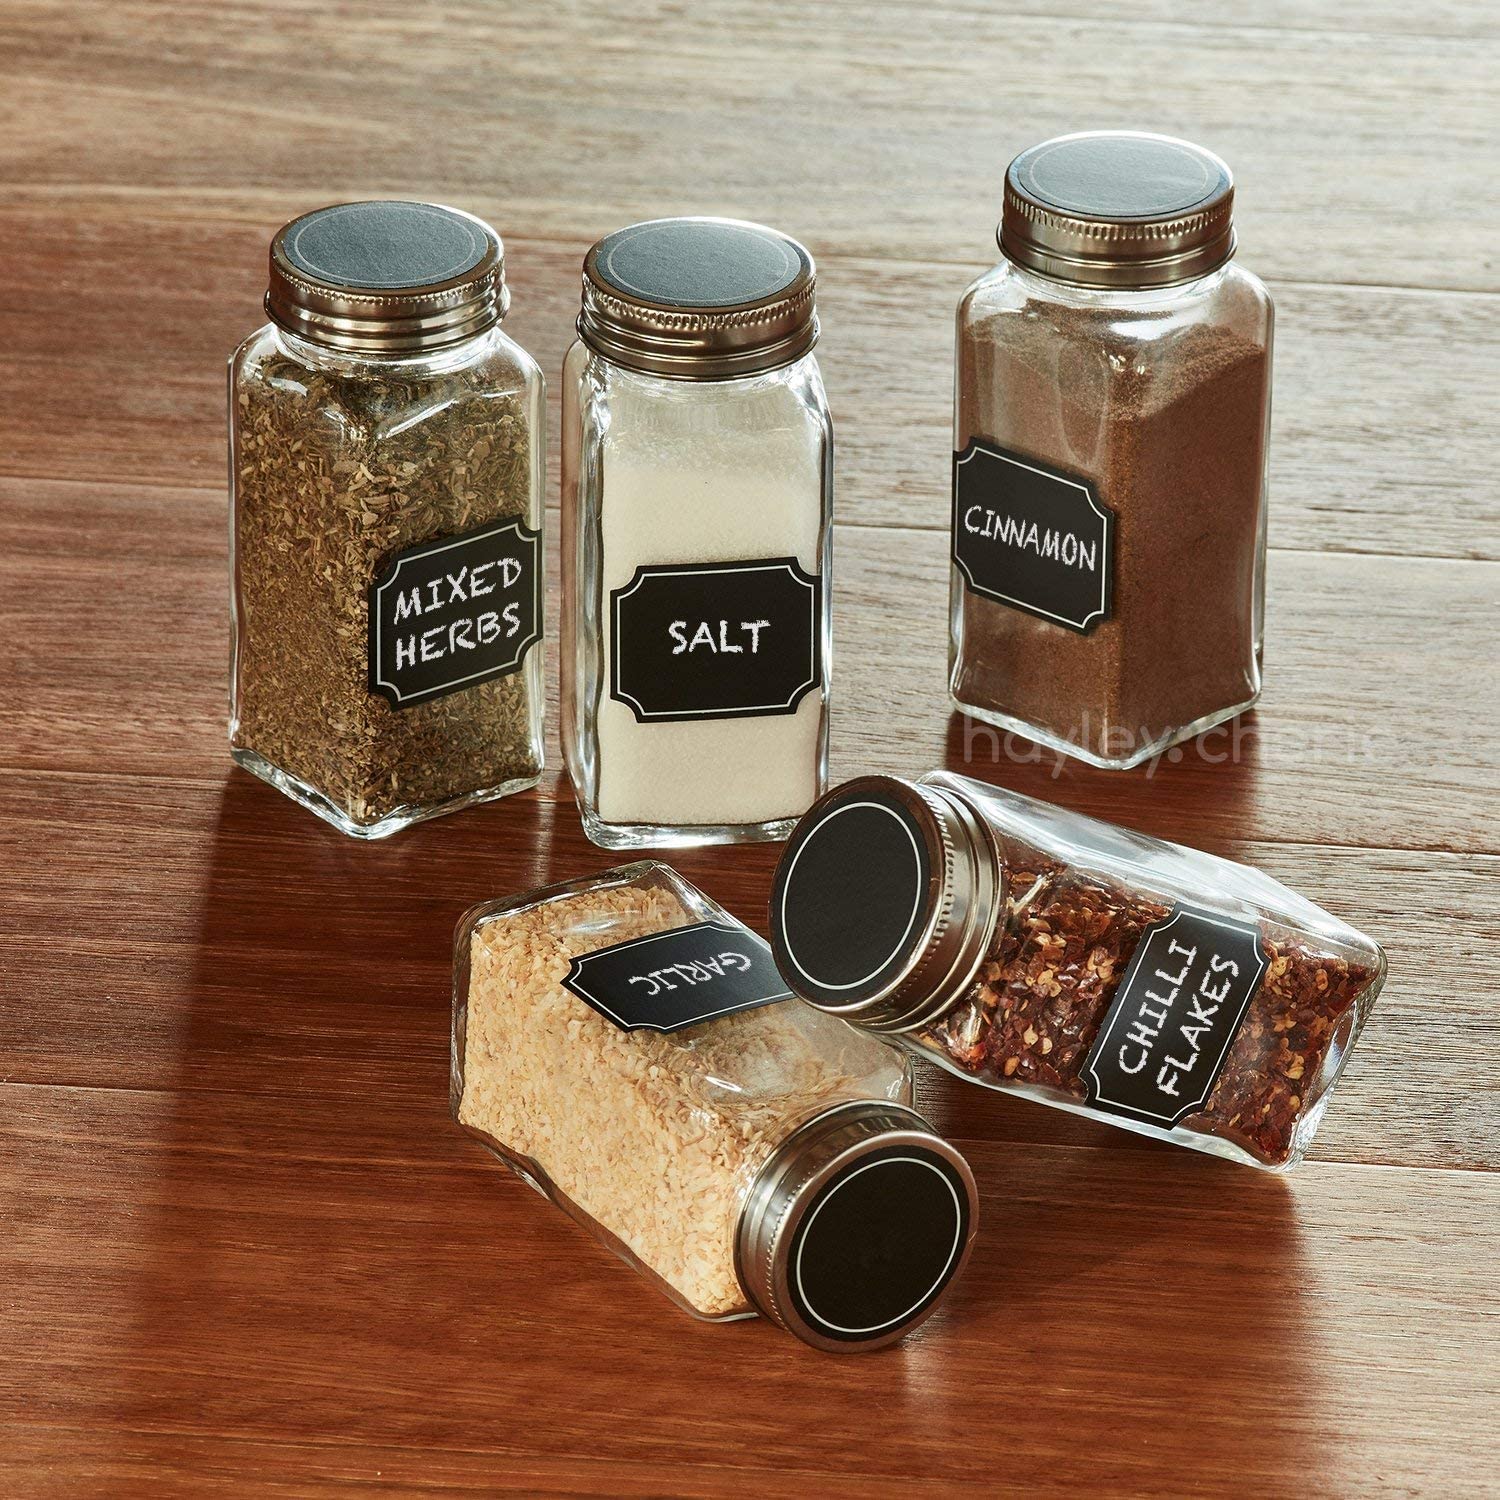 6 oz Glass French Square Spice Jar with Shaker and Your choice of Lid